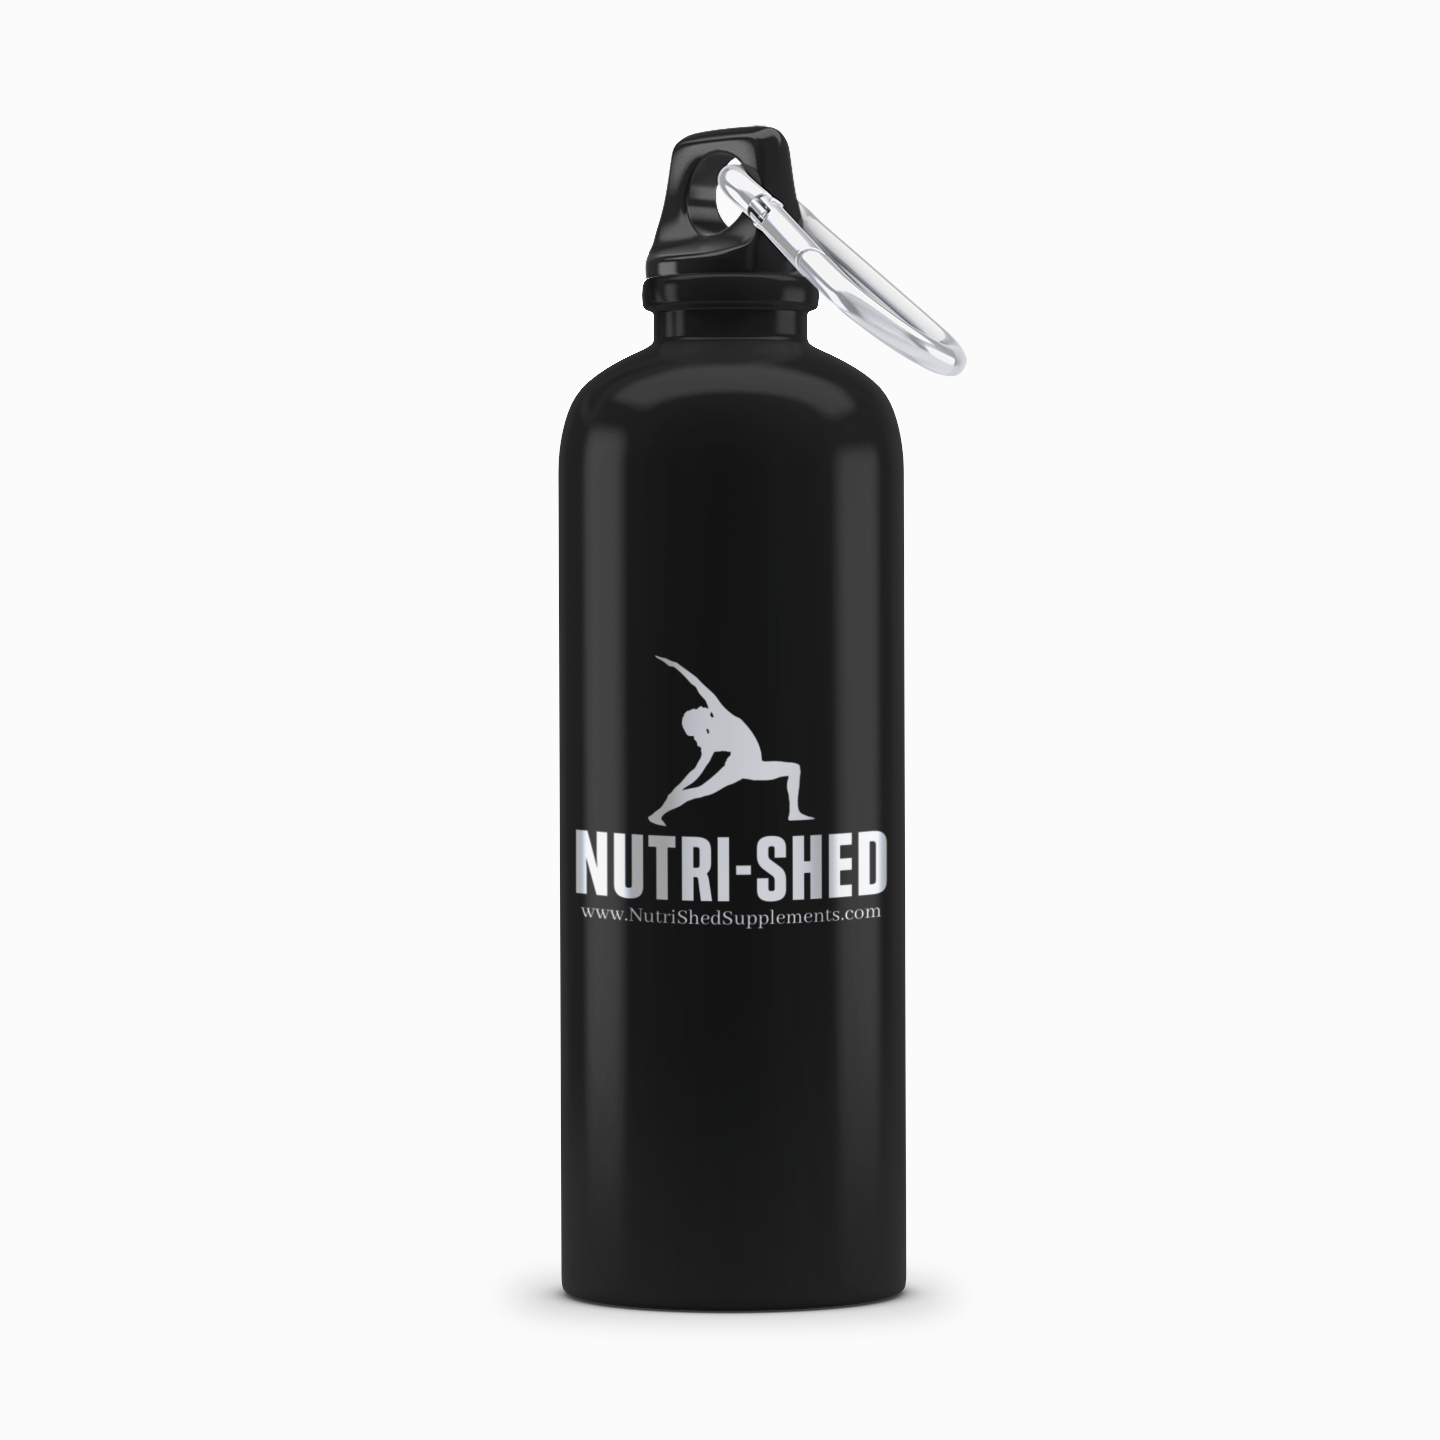 Nutri-Shed: 24-Ounce Aluminum Water Bottle - Carabiner Clip Included - Nutri Shed Supplement Lab 